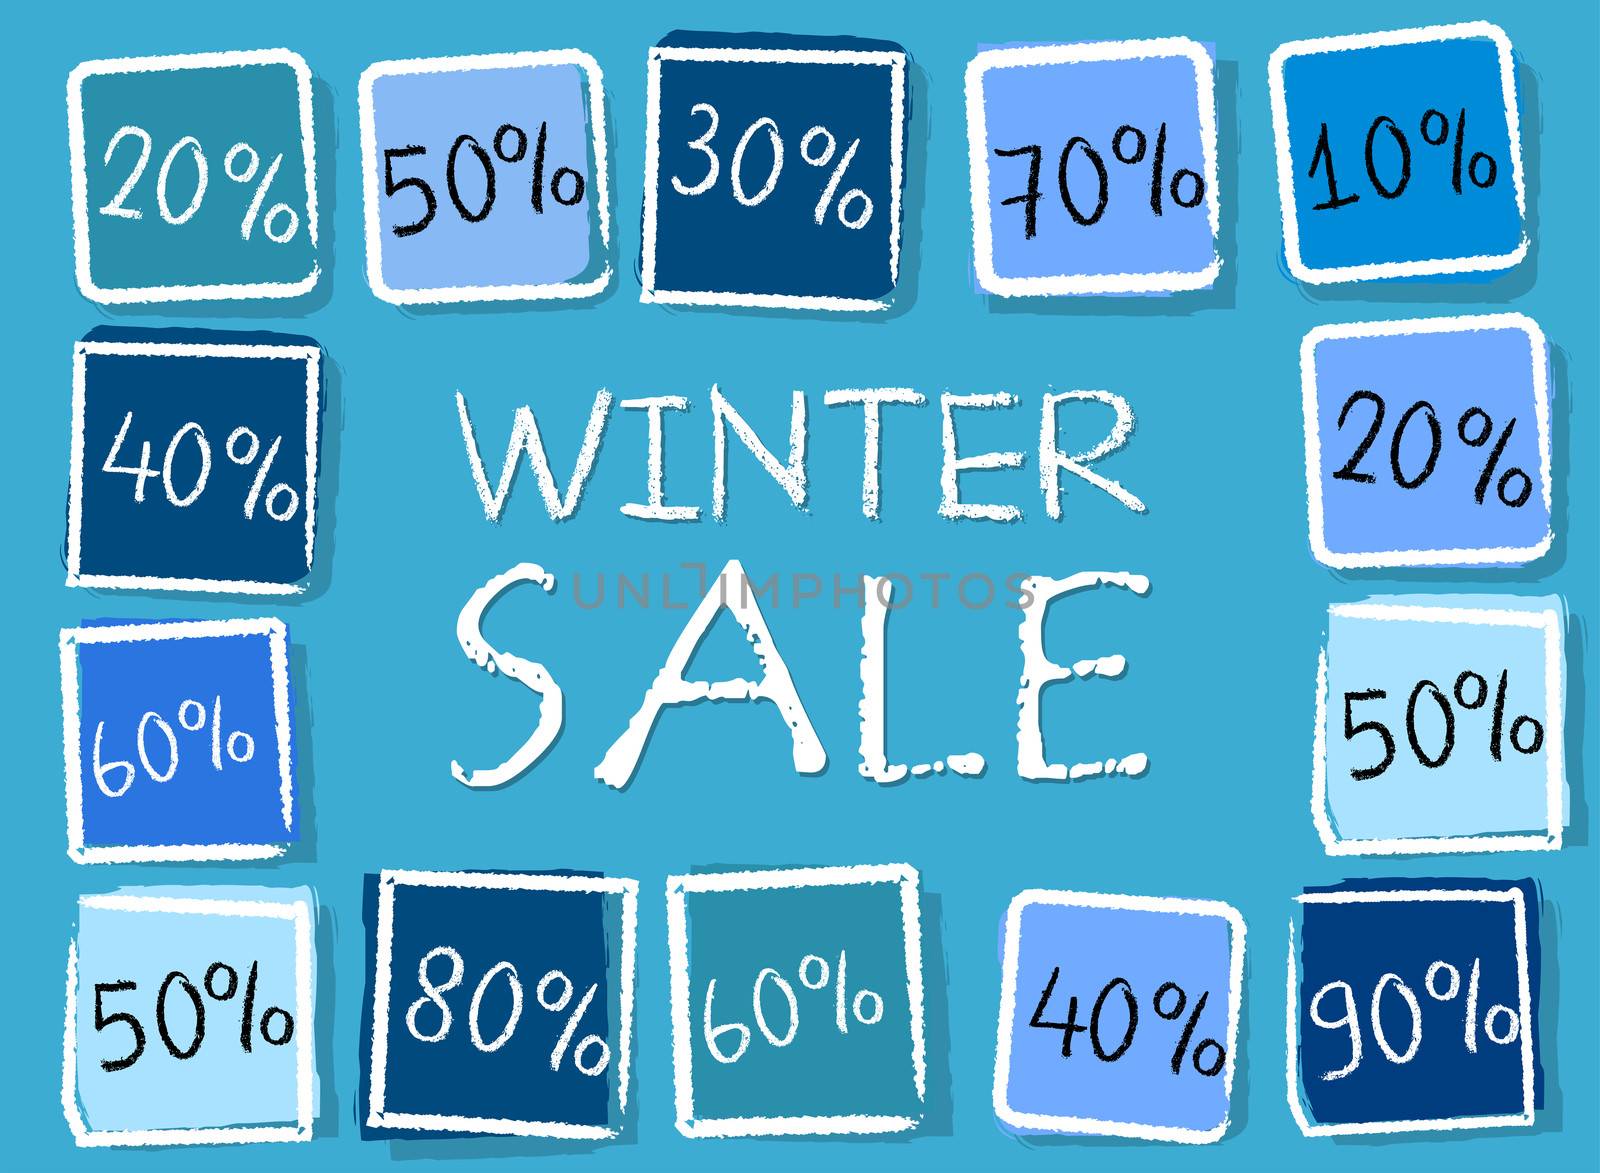 winter sale and different percentages - retro style blue label with text and squares, business seasonal concept